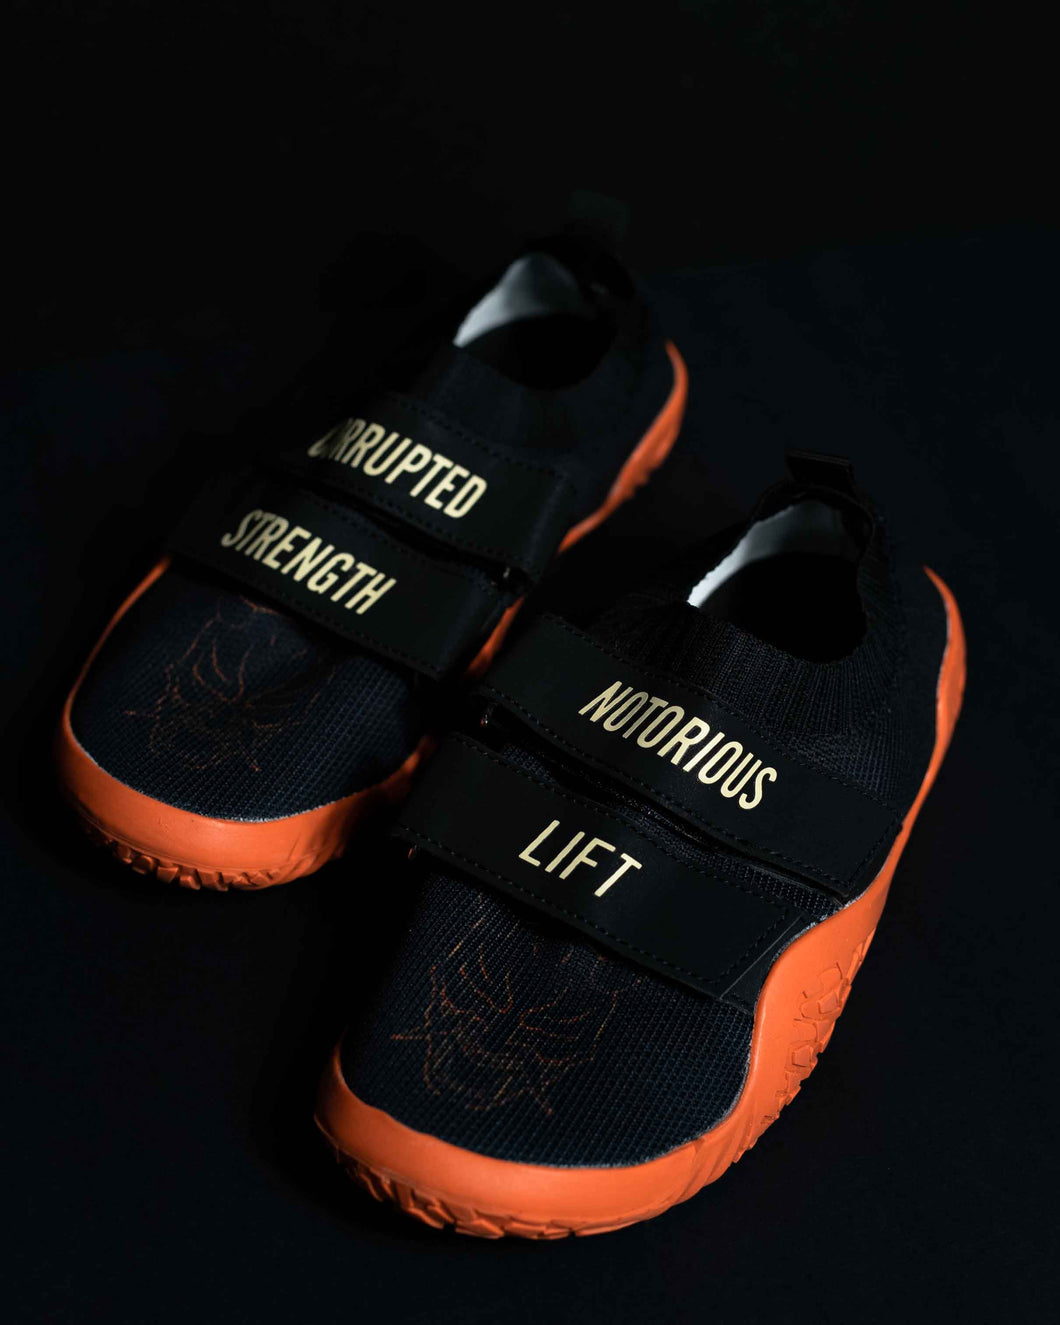 Corrupted Strength x Notorious Lift Slipper